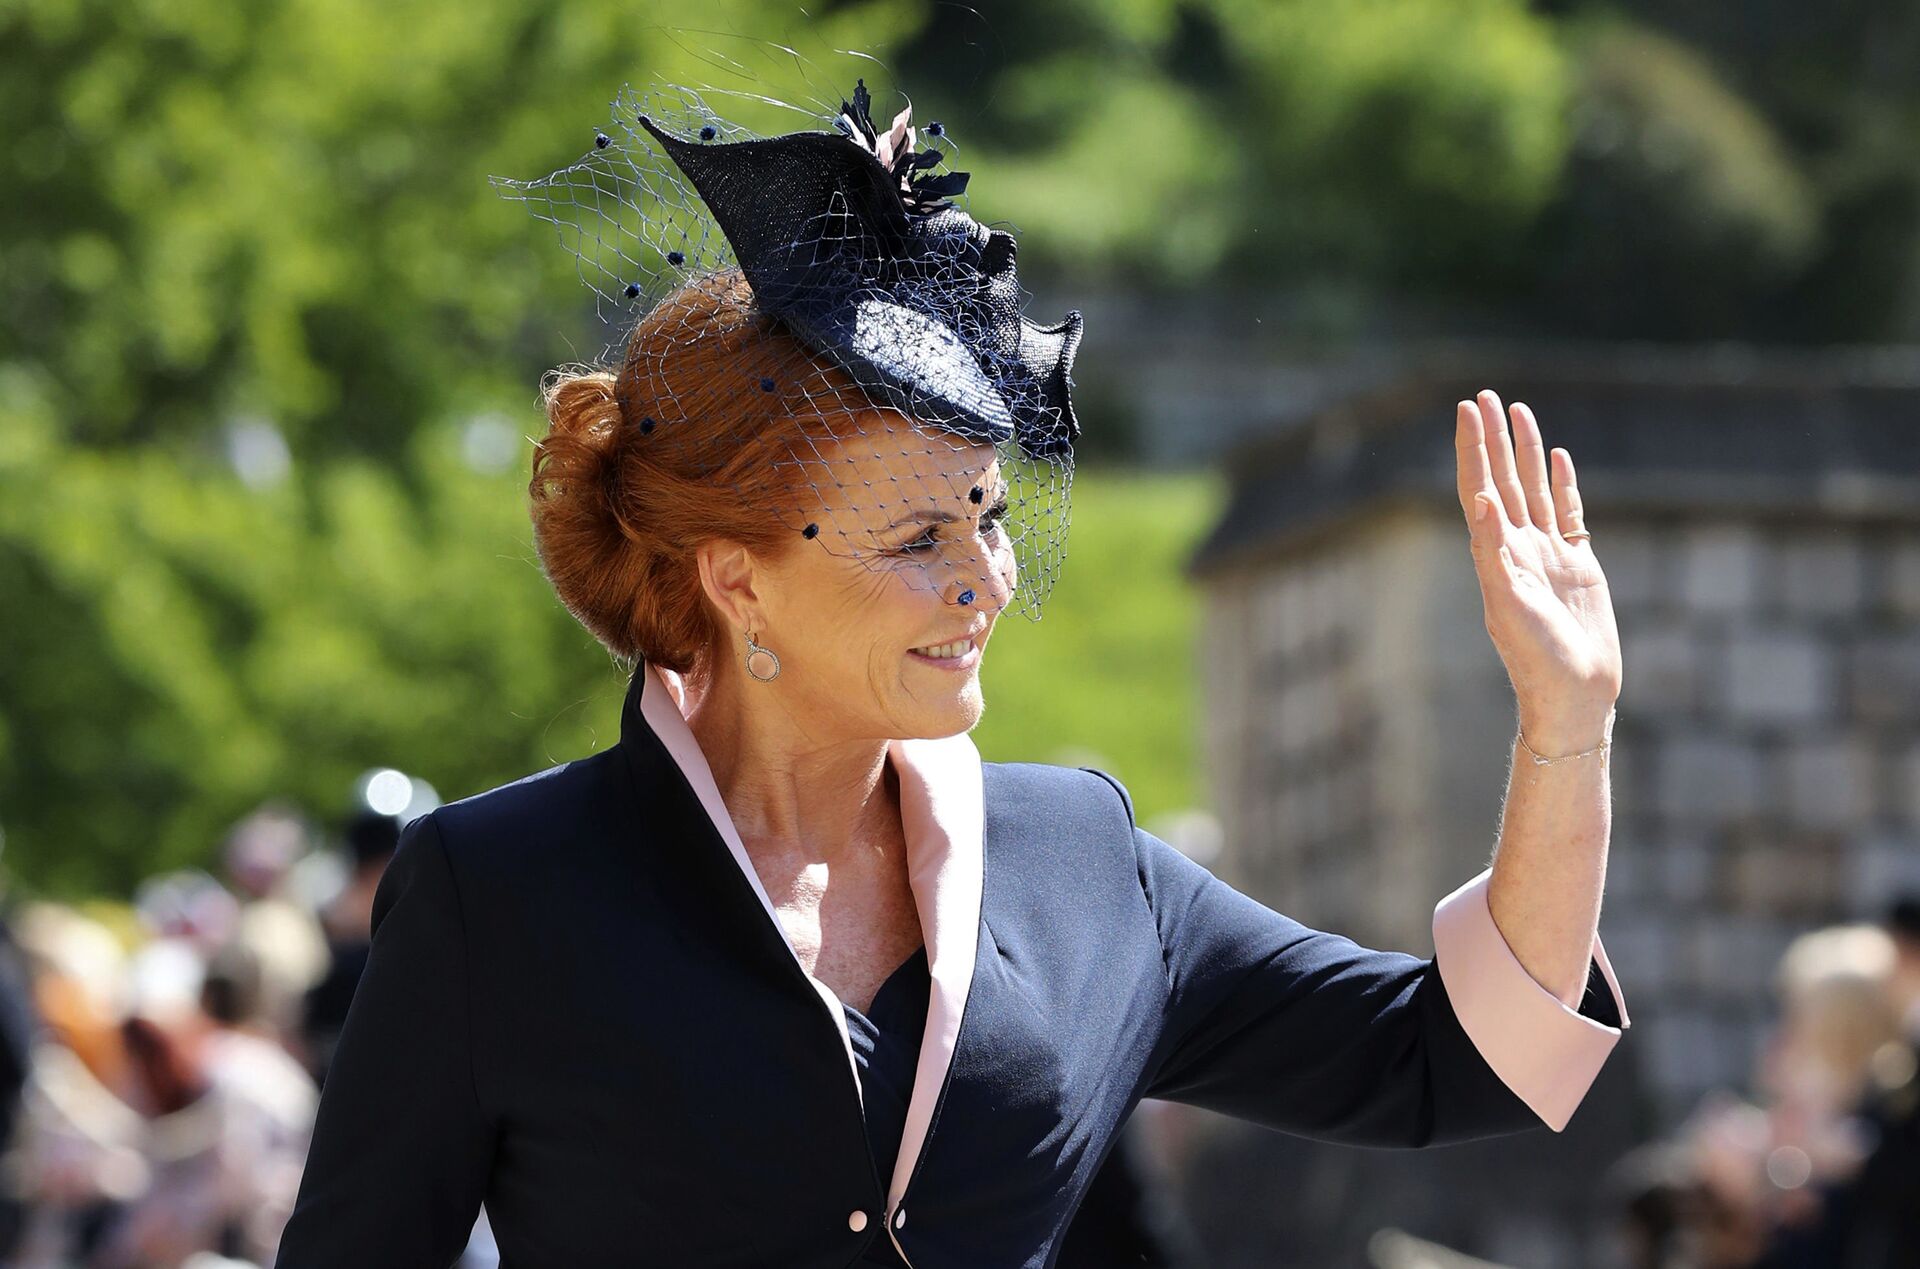 Sarah Ferguson arrives for the wedding ceremony of Prince Harry and Meghan Markle at St. George's Chapel in Windsor Castle in Windsor, near London, England, Saturday, May 19, 2018 - Sputnik International, 1920, 01.04.2022